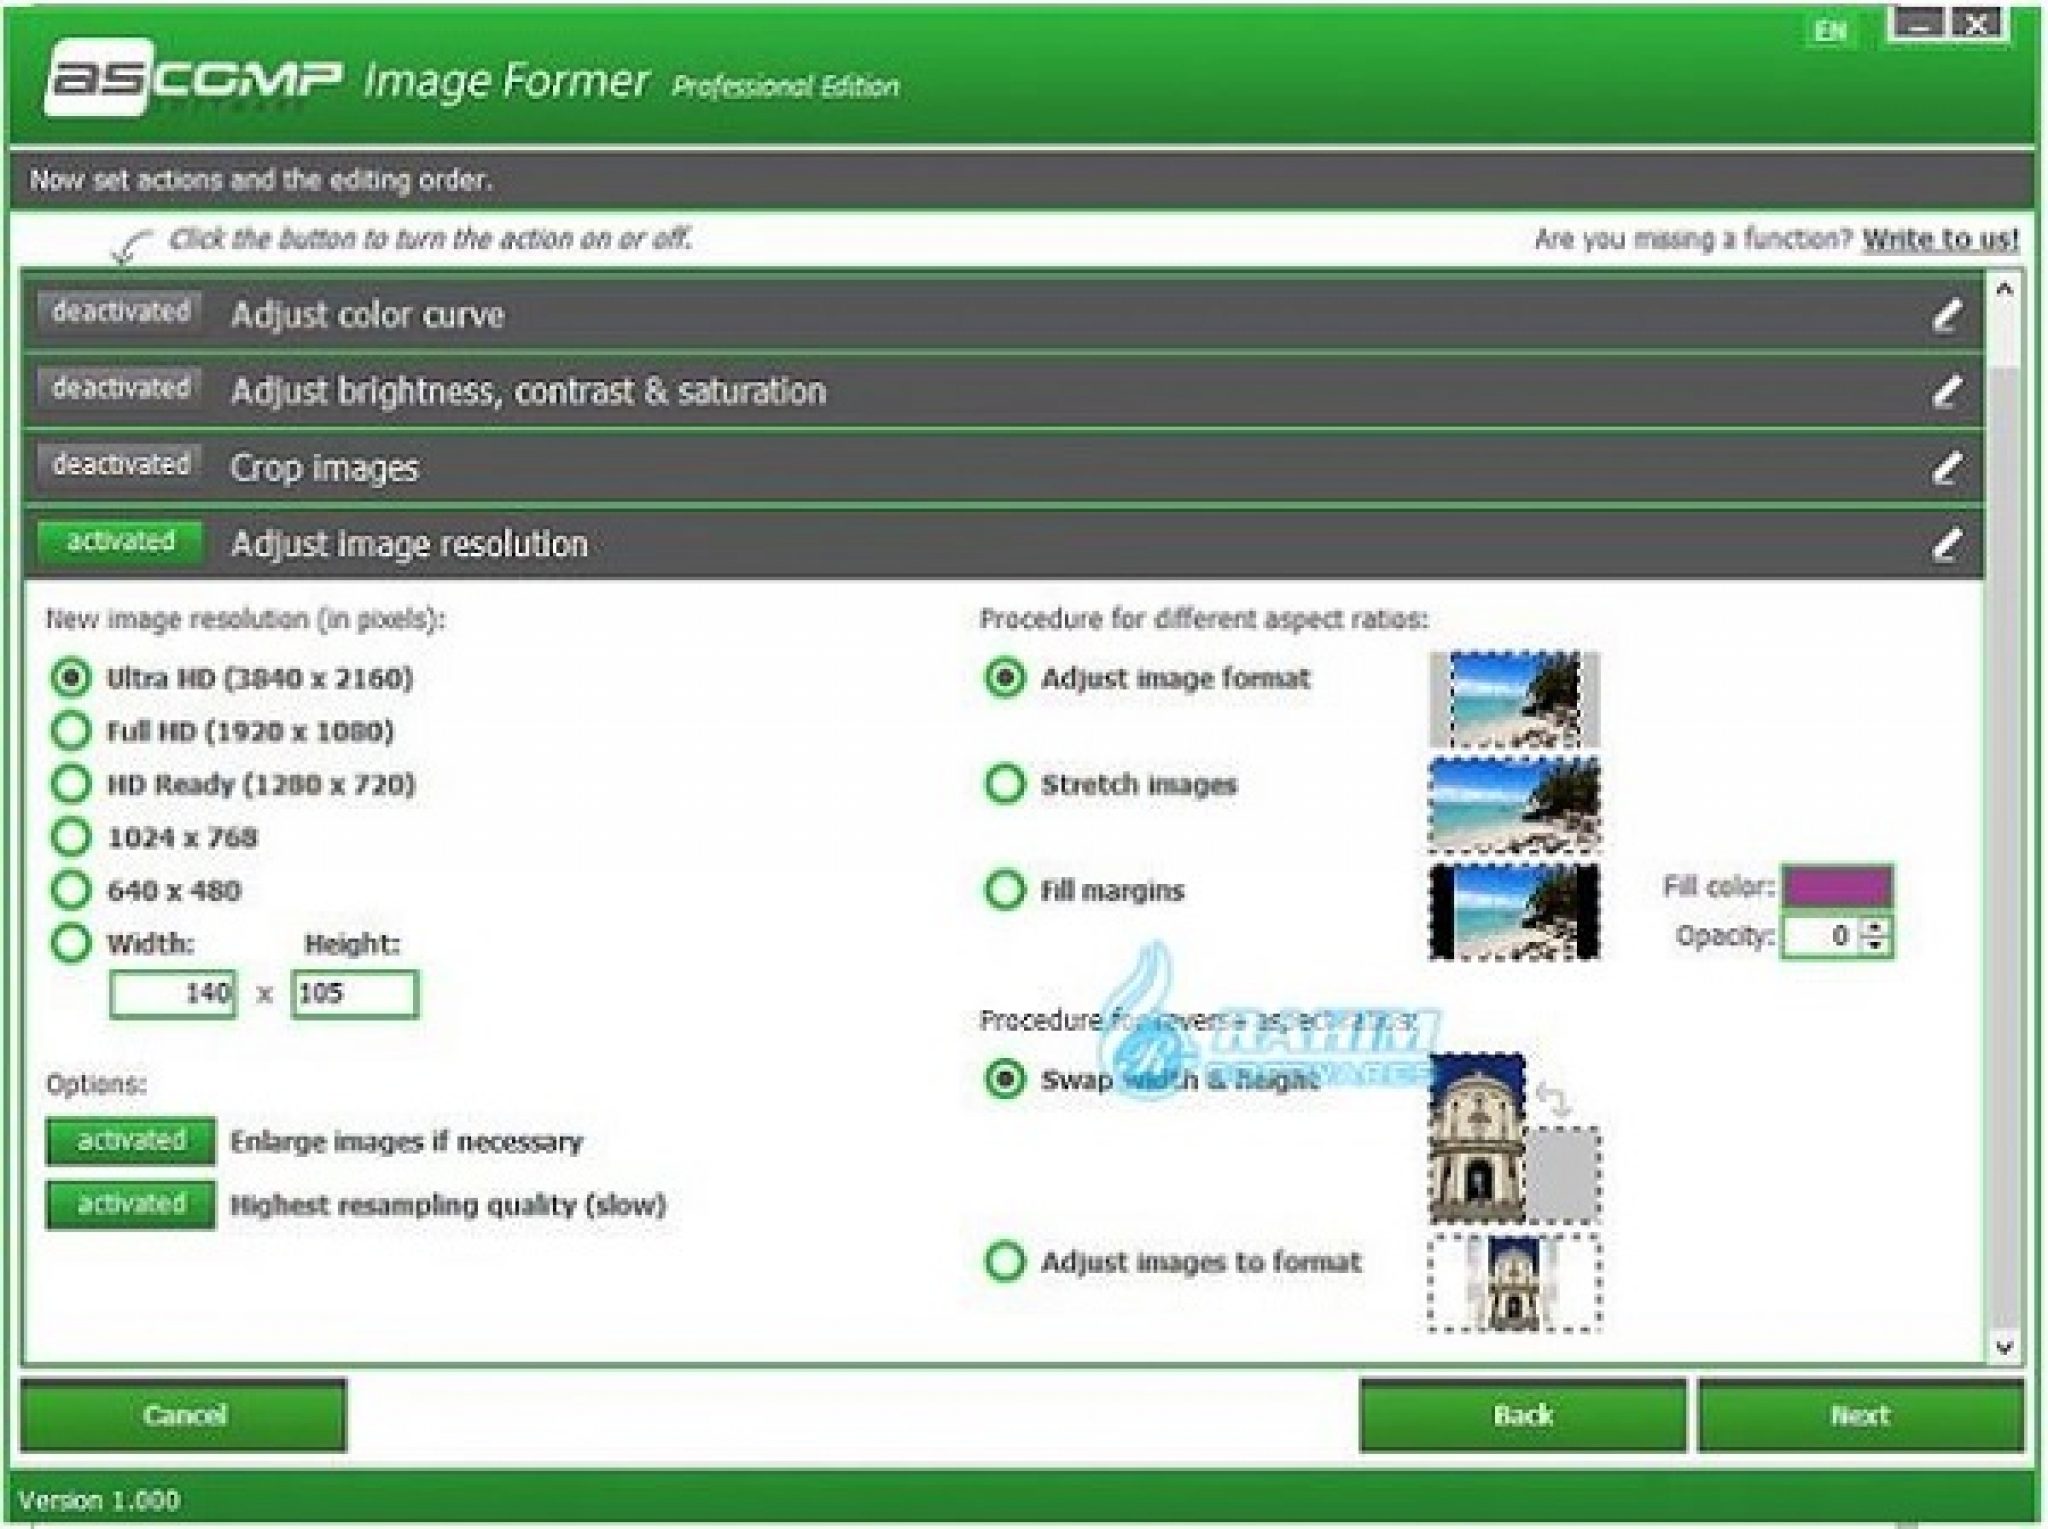 ASCOMP Image Former Professional 2.004 for ios download free